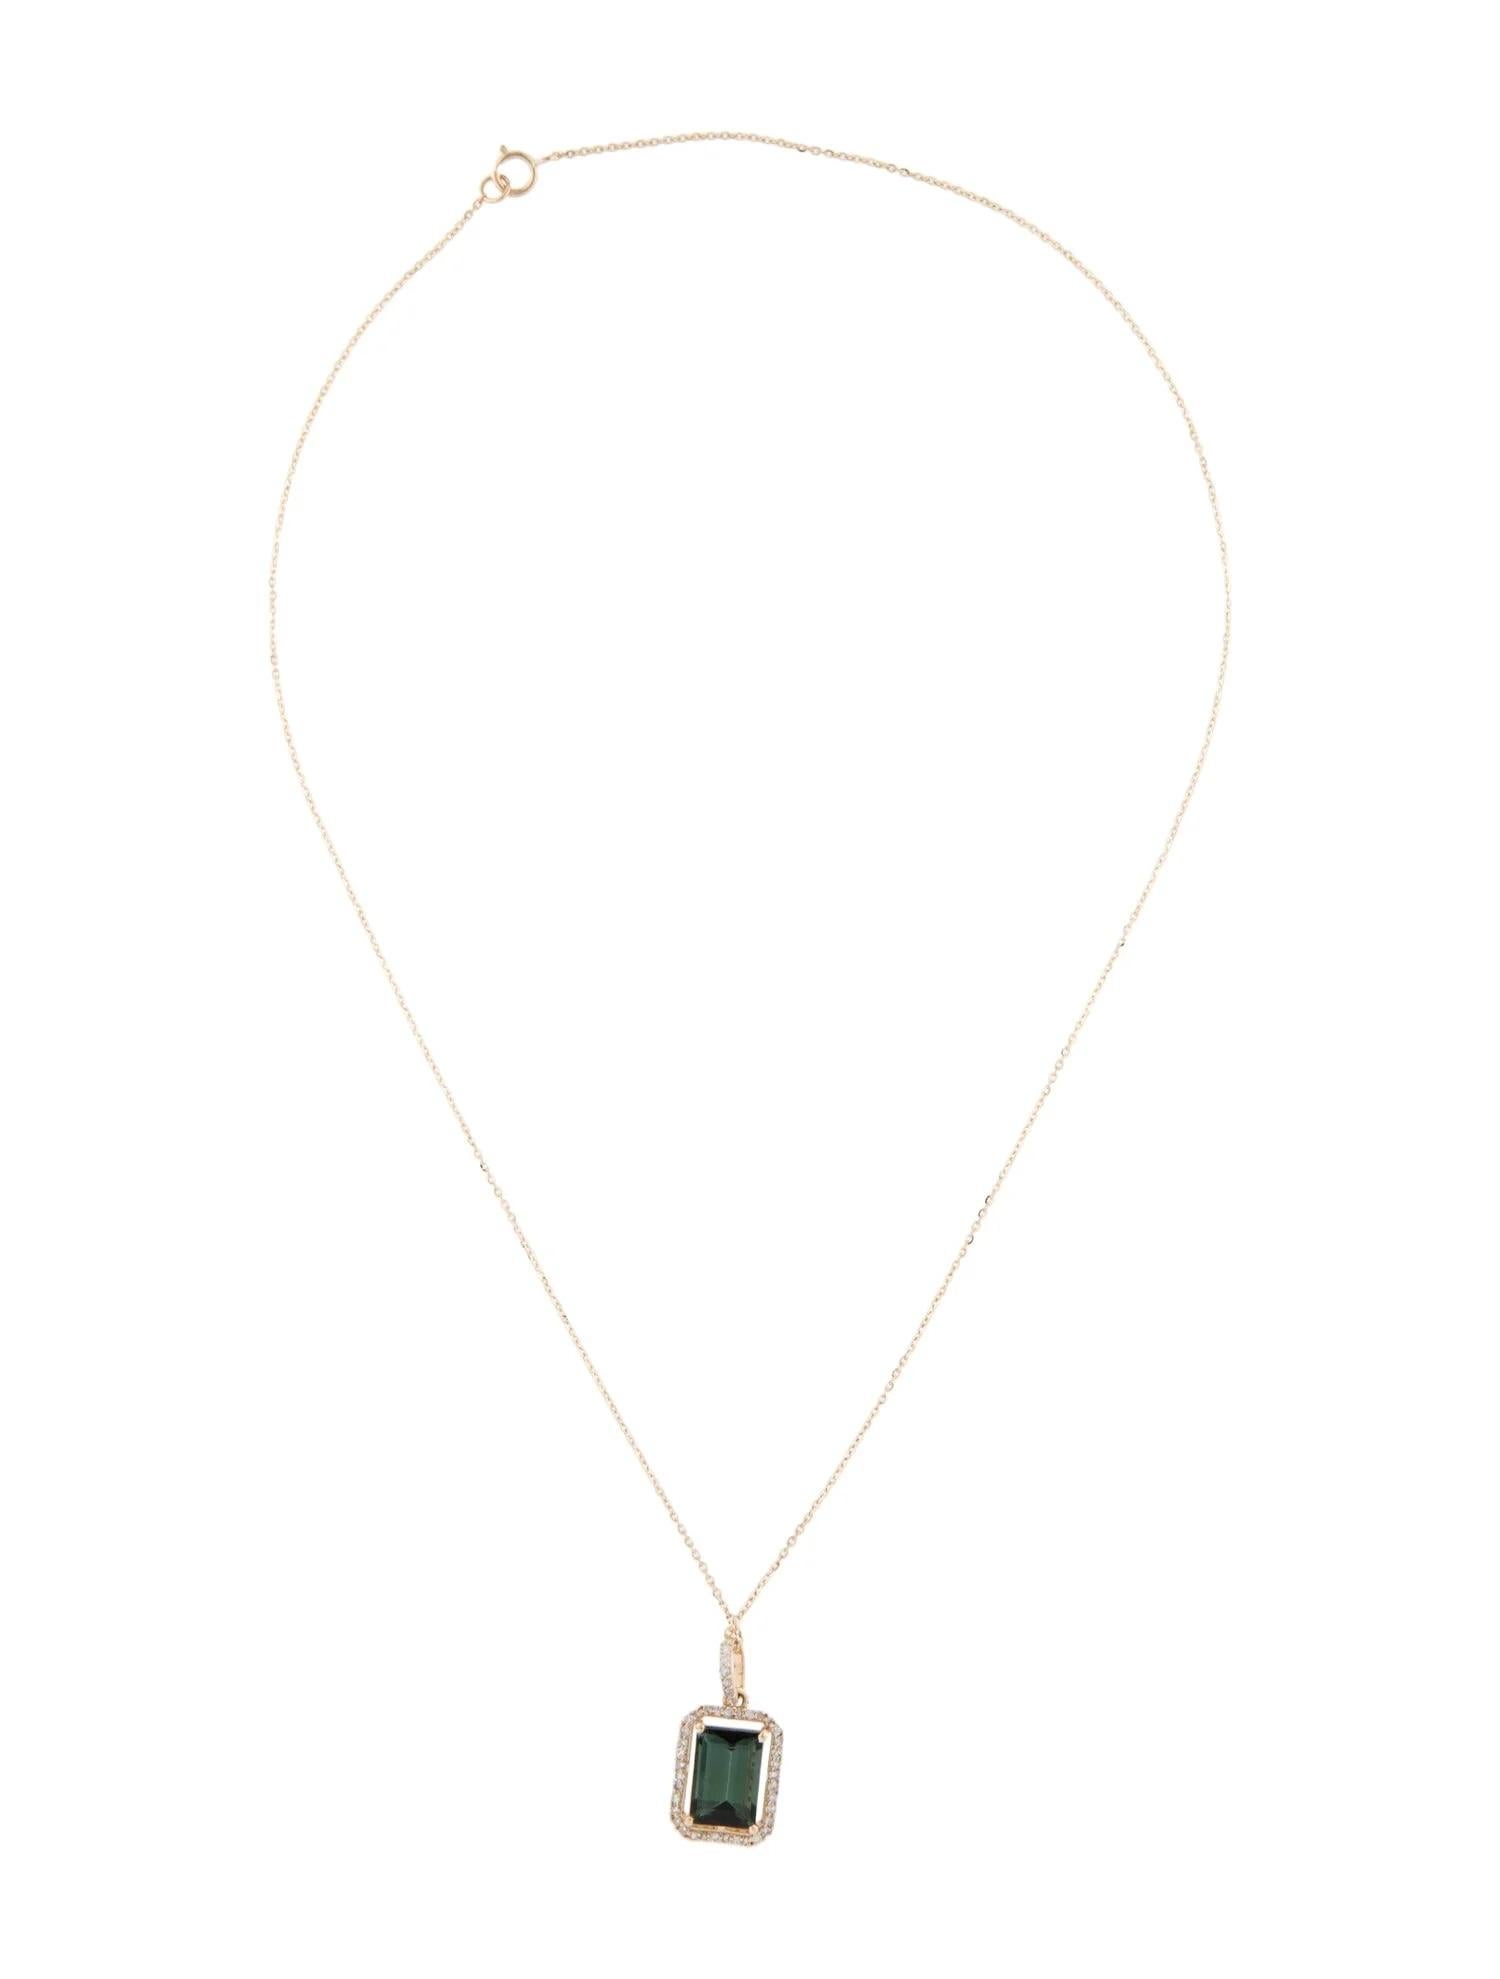 Enhance your jewelry collection with this stunning 14K Yellow Gold Pendant Necklace, featuring a vibrant green tourmaline and sparkling diamonds. This elegant piece is perfect for adding a touch of sophistication and luxury to any